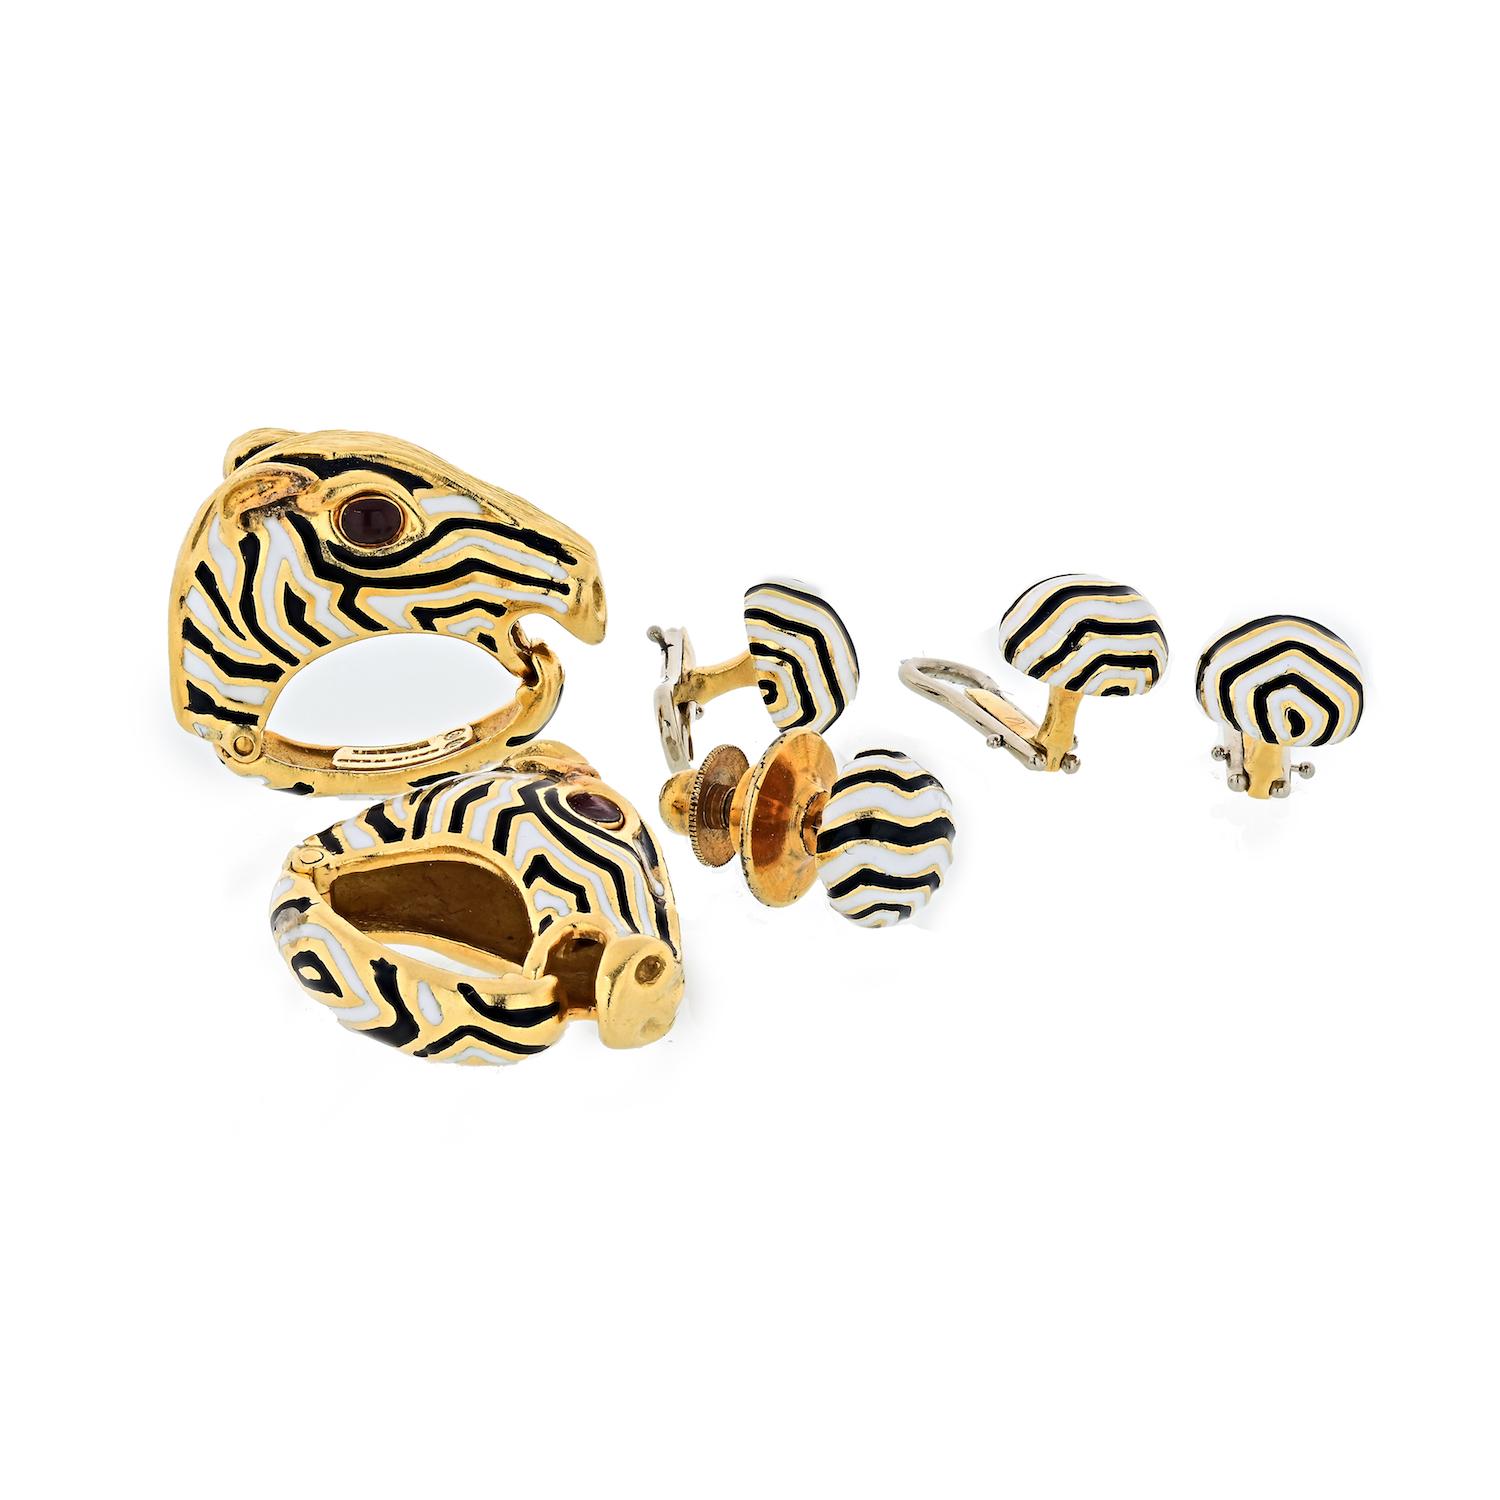 Gold, Black, White and Red Enamel Zebra Dress Set, David Webb 18 kt., including a pair of cufflinks fashioned as zebra heads applied with alternating stripes of white and black enamel, topped with textured gold mane and ears, with red enamel eyes,